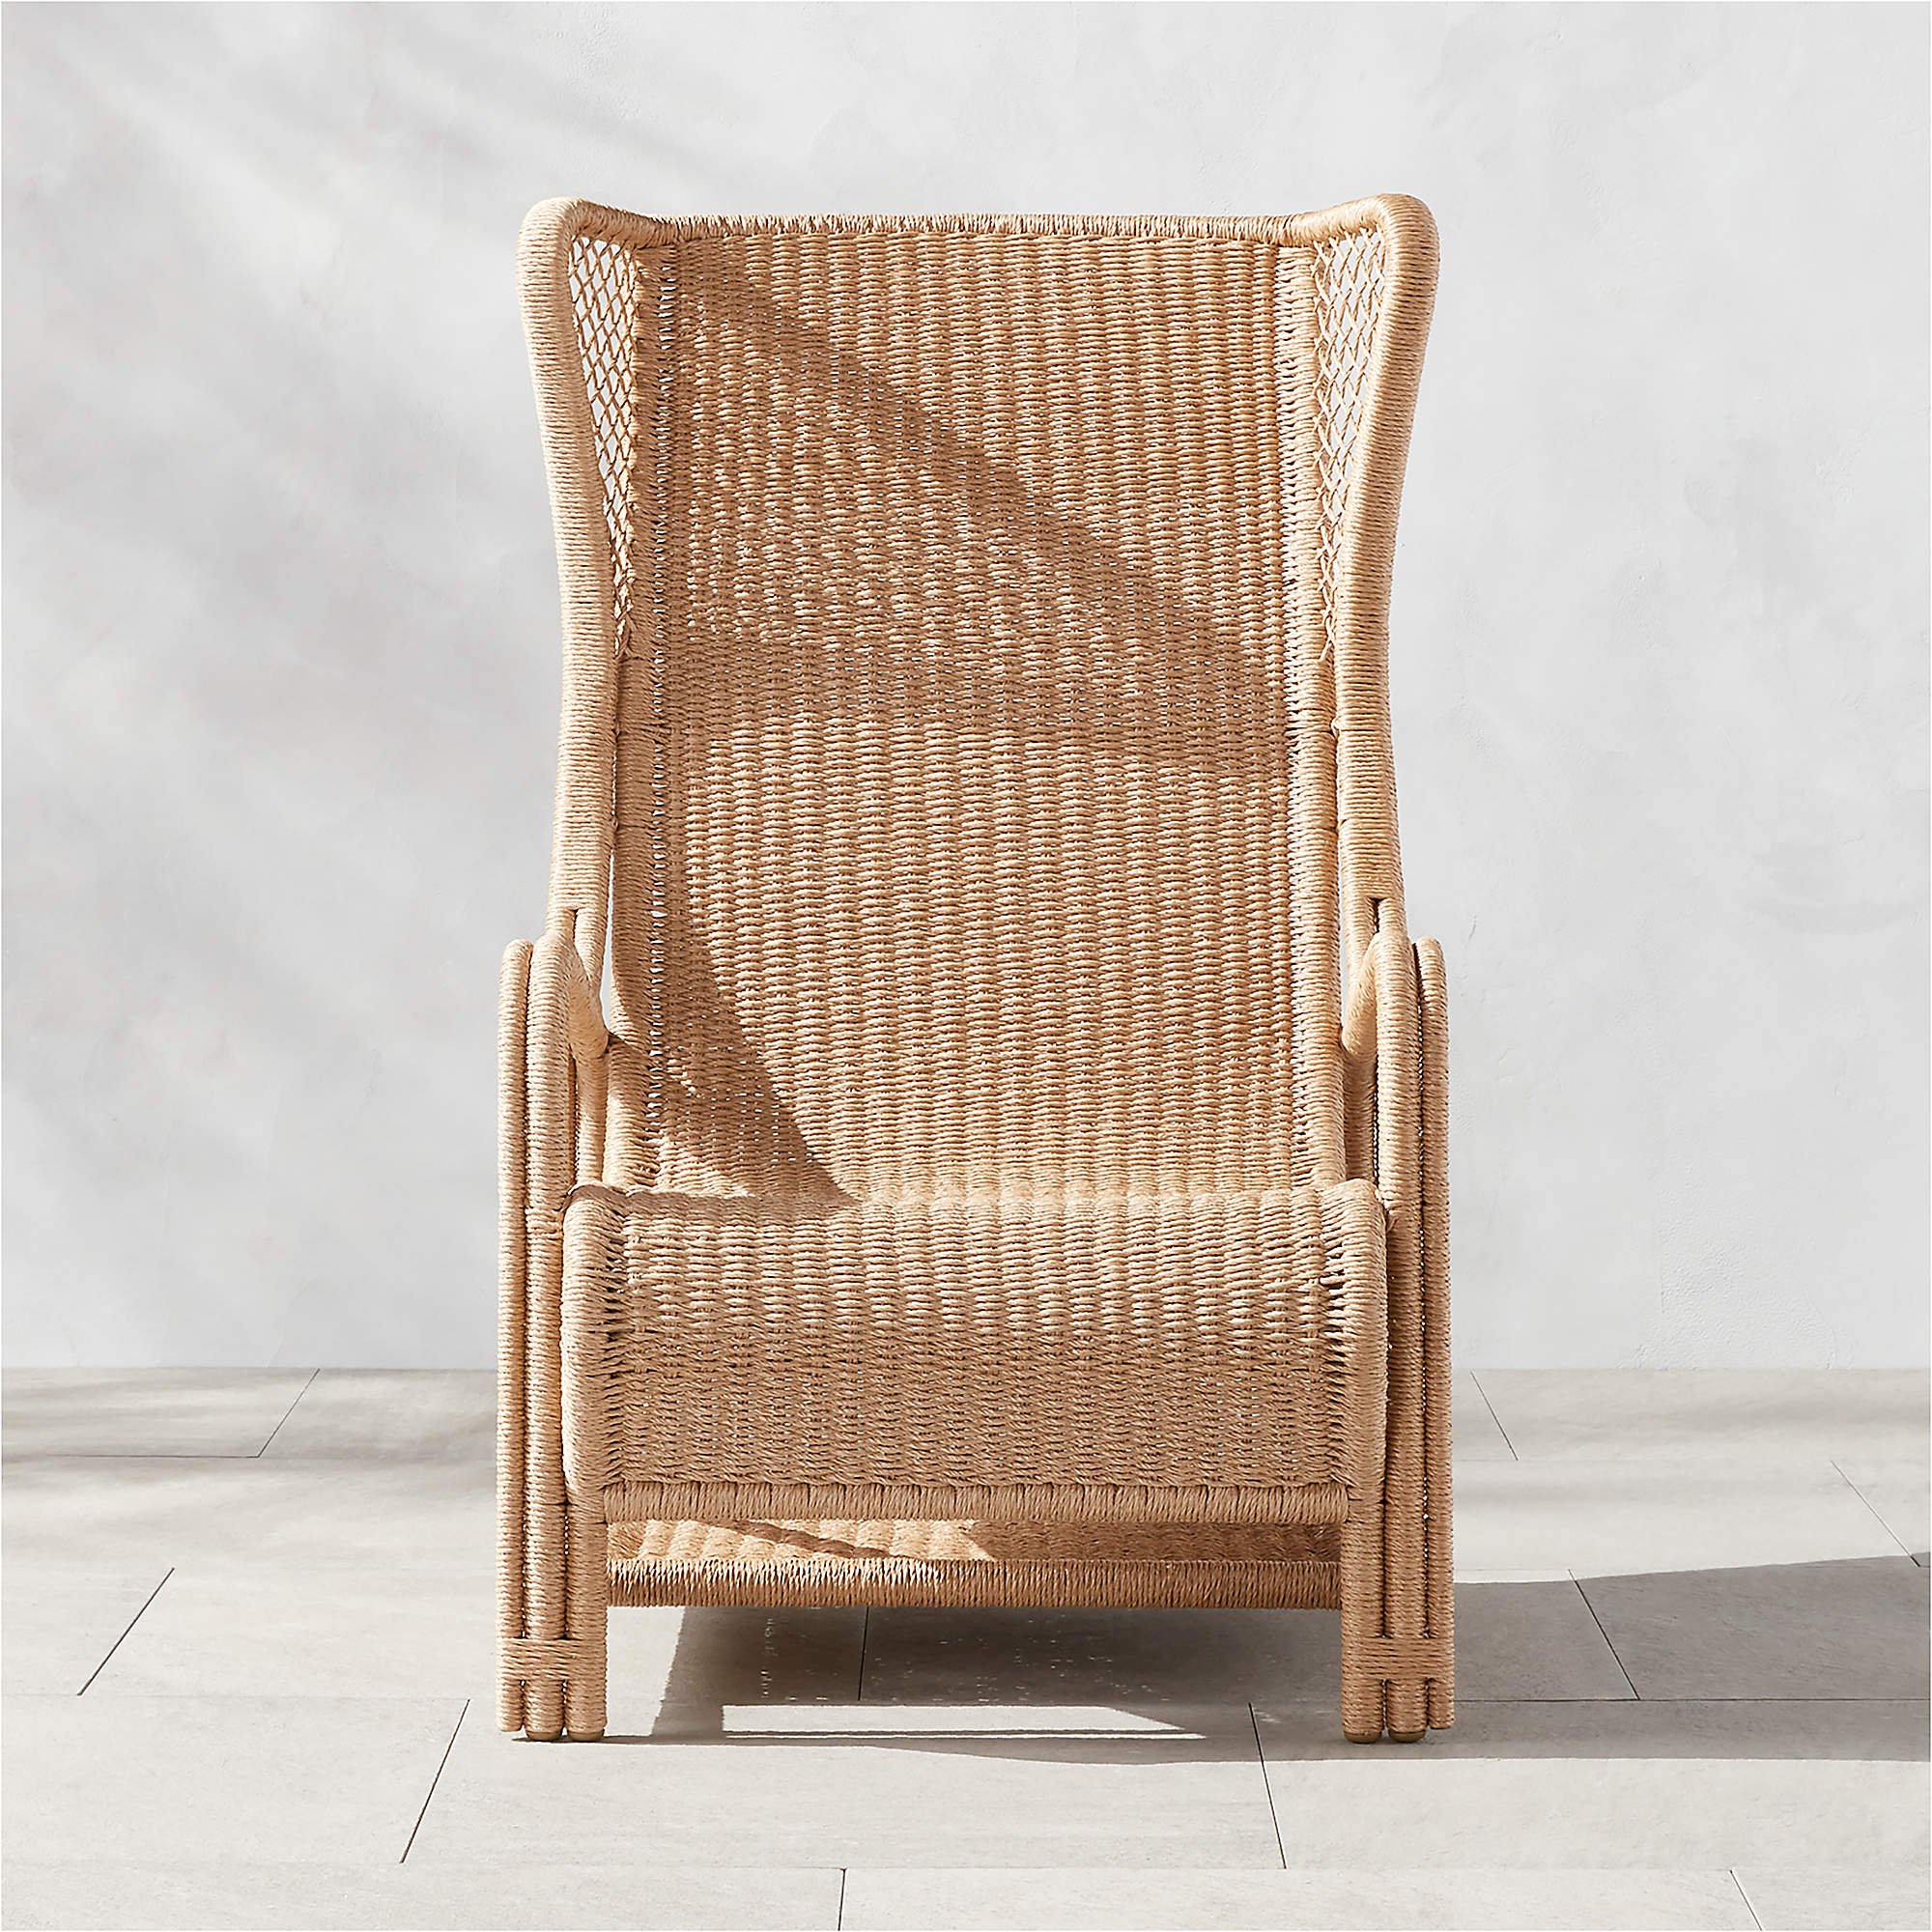 remo-rattan-wingback-outdoor-lounge-chair.jpg